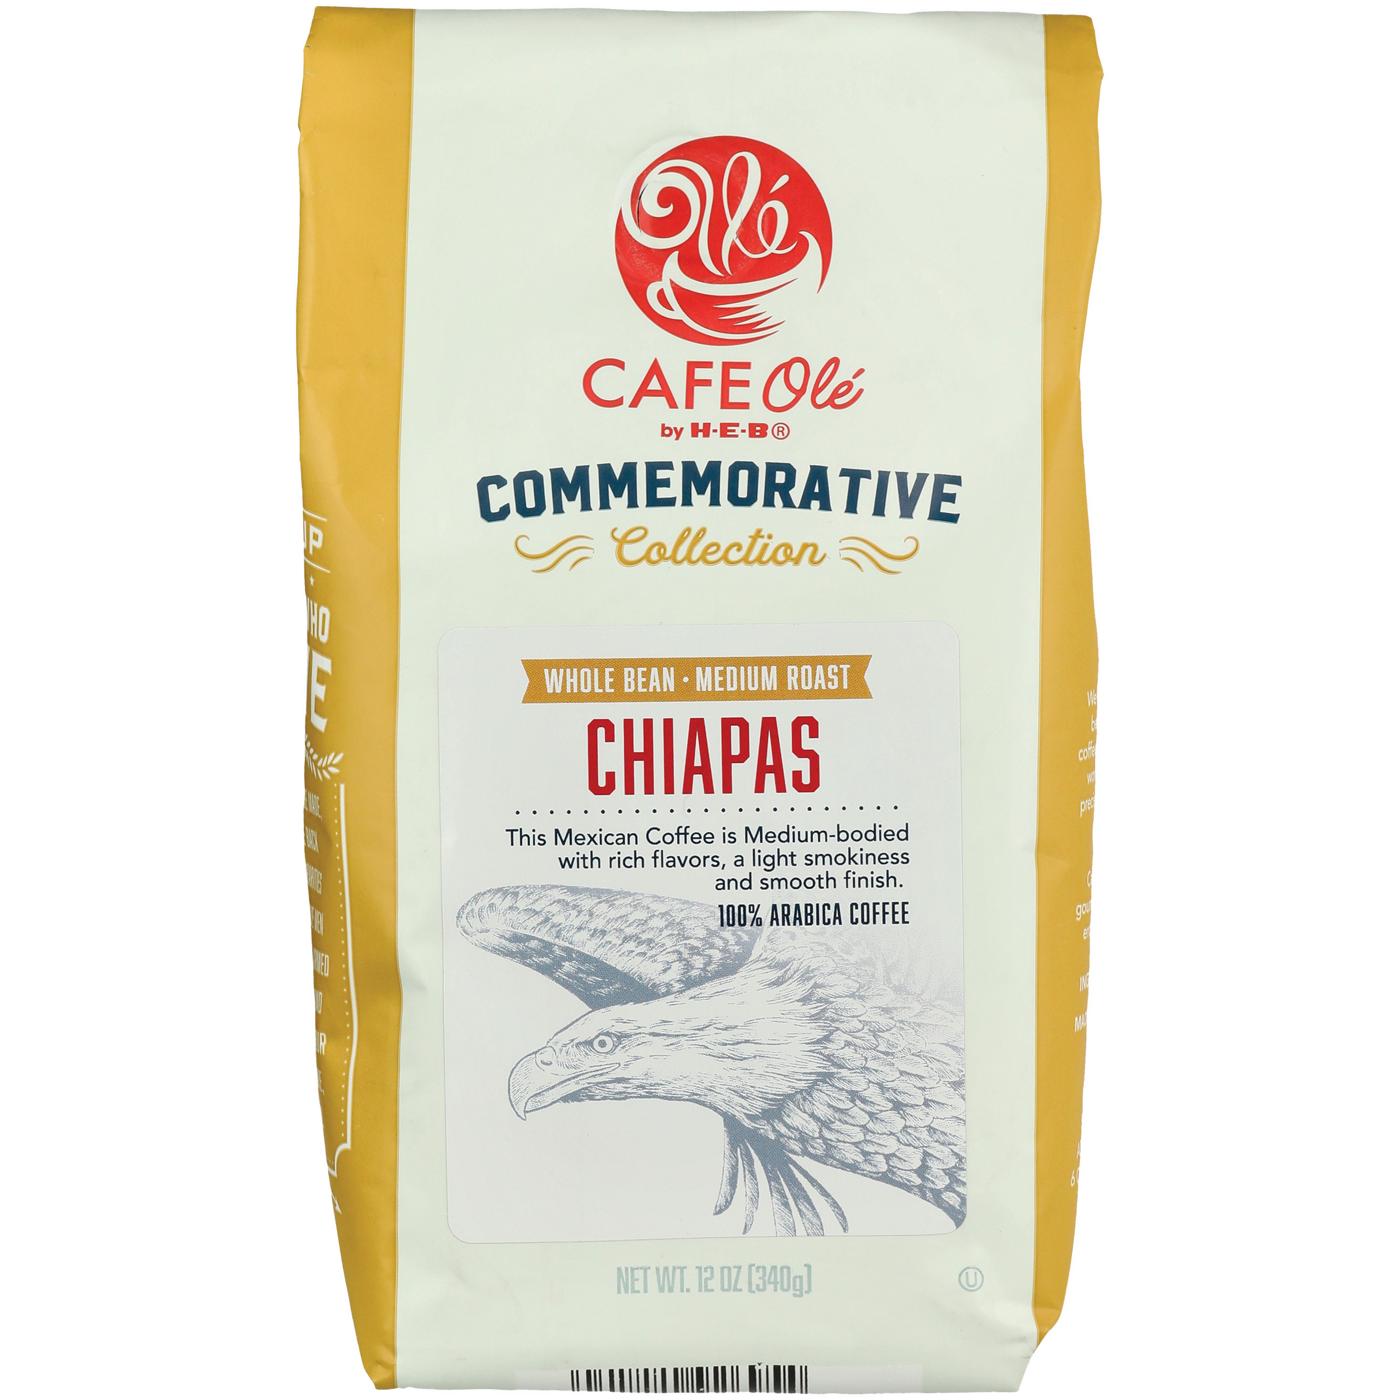 CAFE Olé by H-E-B Commemorative Collection Whole Bean Medium Roast Chiapas Coffee; image 1 of 2